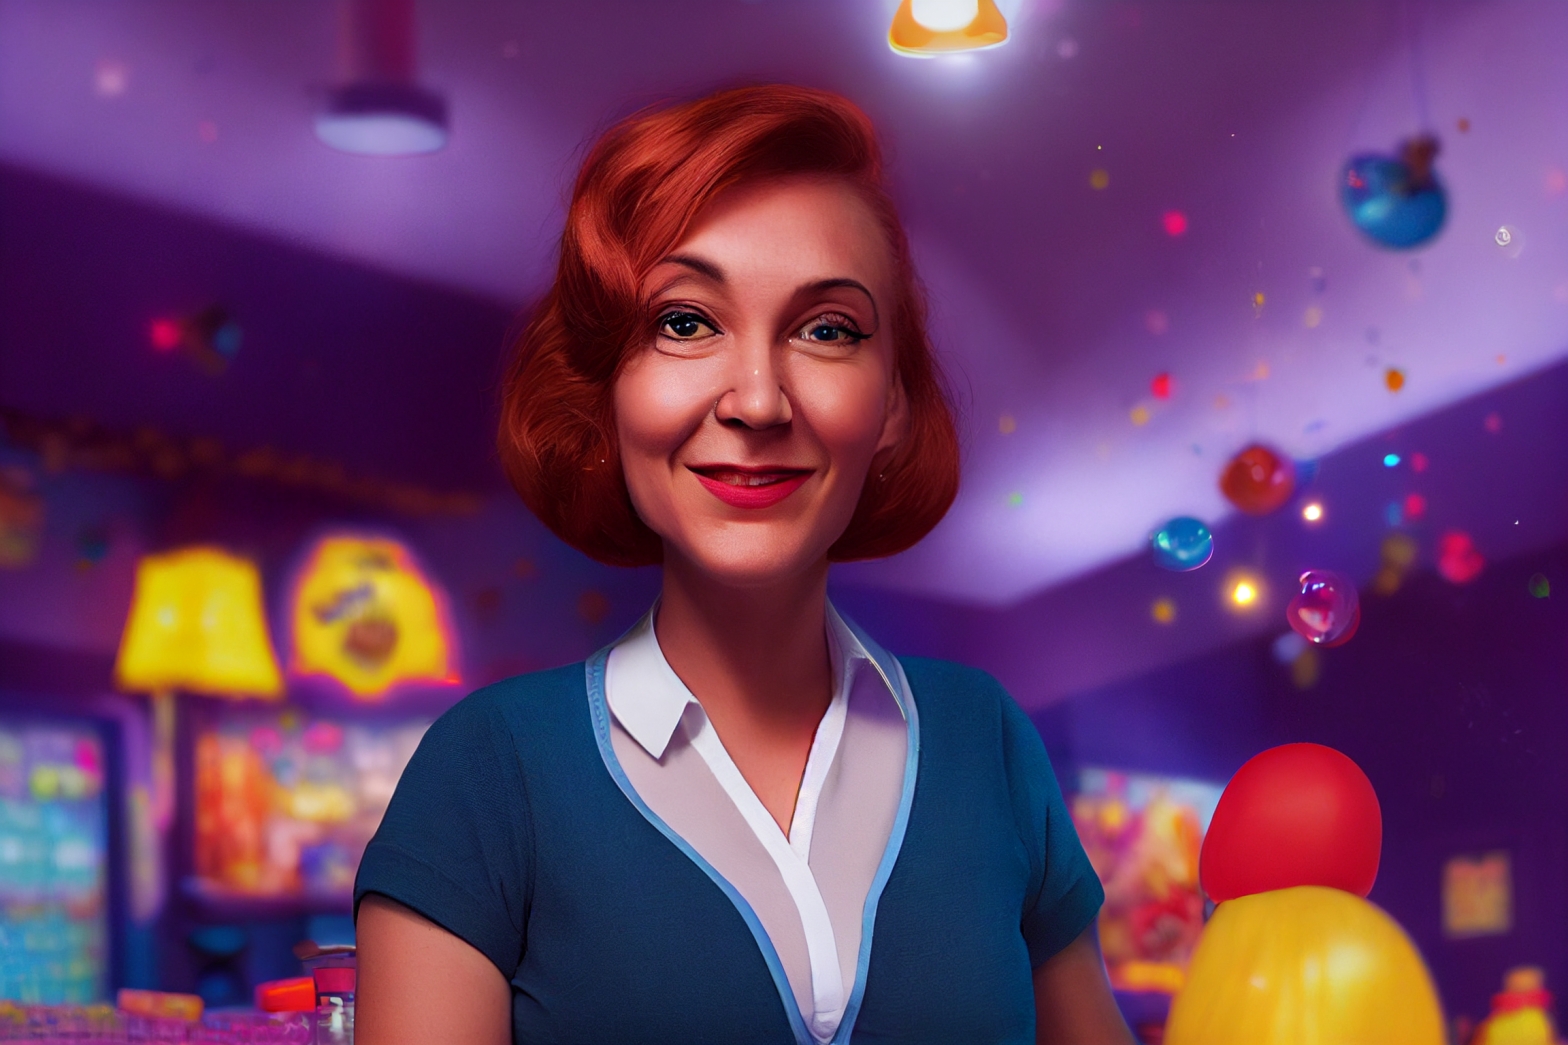 Portrait of Jolene Krumsnitchy, Owner/Operator of JeeBee's Bingo Hall. Bingo, 9, People, 6, Windows, 3, Lamps, 1. Interior. Basement. Night. People in the background. Disney style. Pixar style., Bright, Hard Lighting, Ray Traced, Ray Tracing Ambient Occlusion, Anti-Aliasing, Tone Mapping, insanely detailed and intricate, hypermaximalist, elegant, ornate, hyper realistic, super detailed, ArtStation style